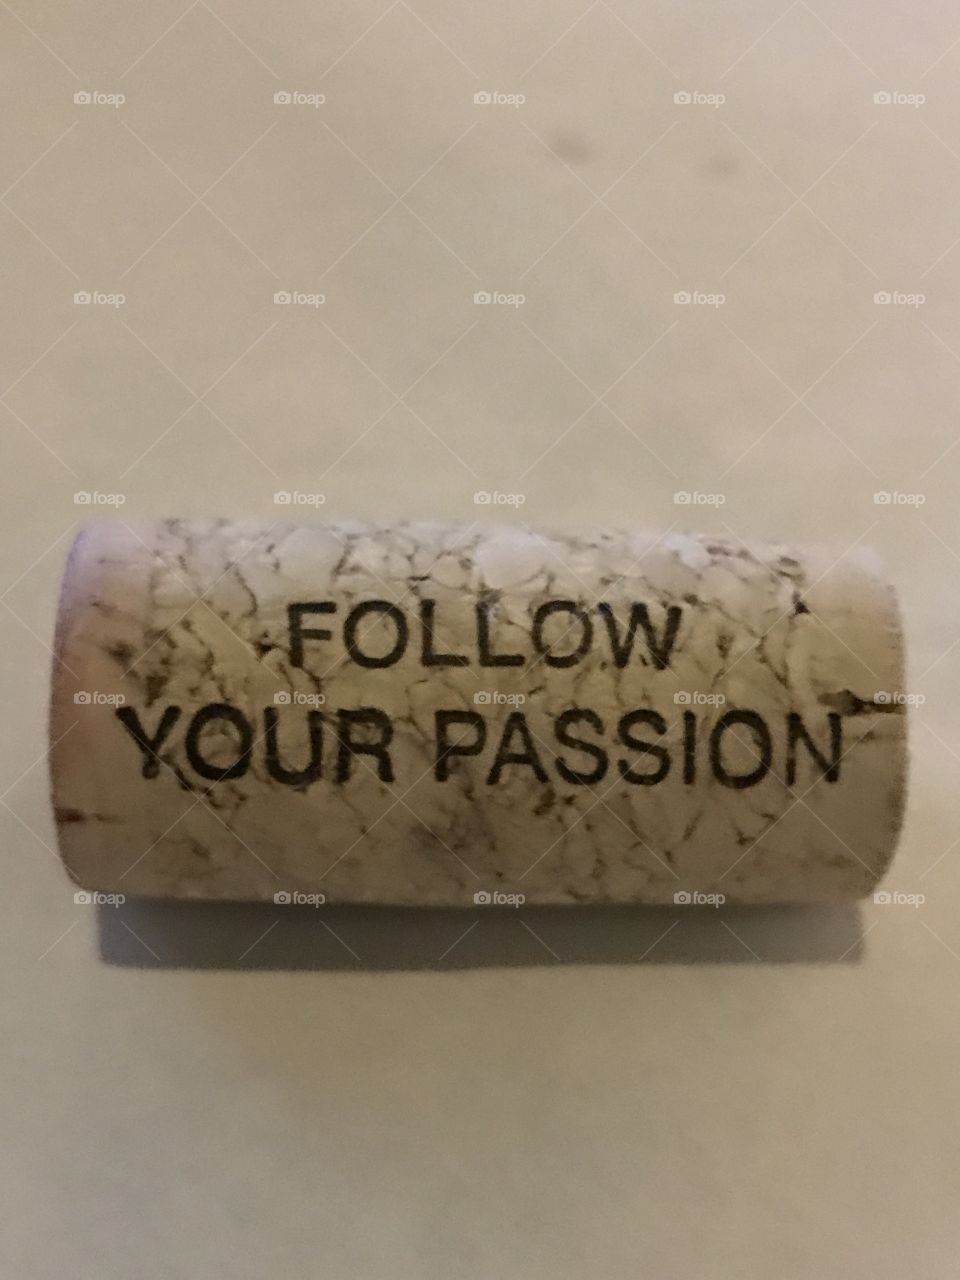 Follow your passion. On a wine cork